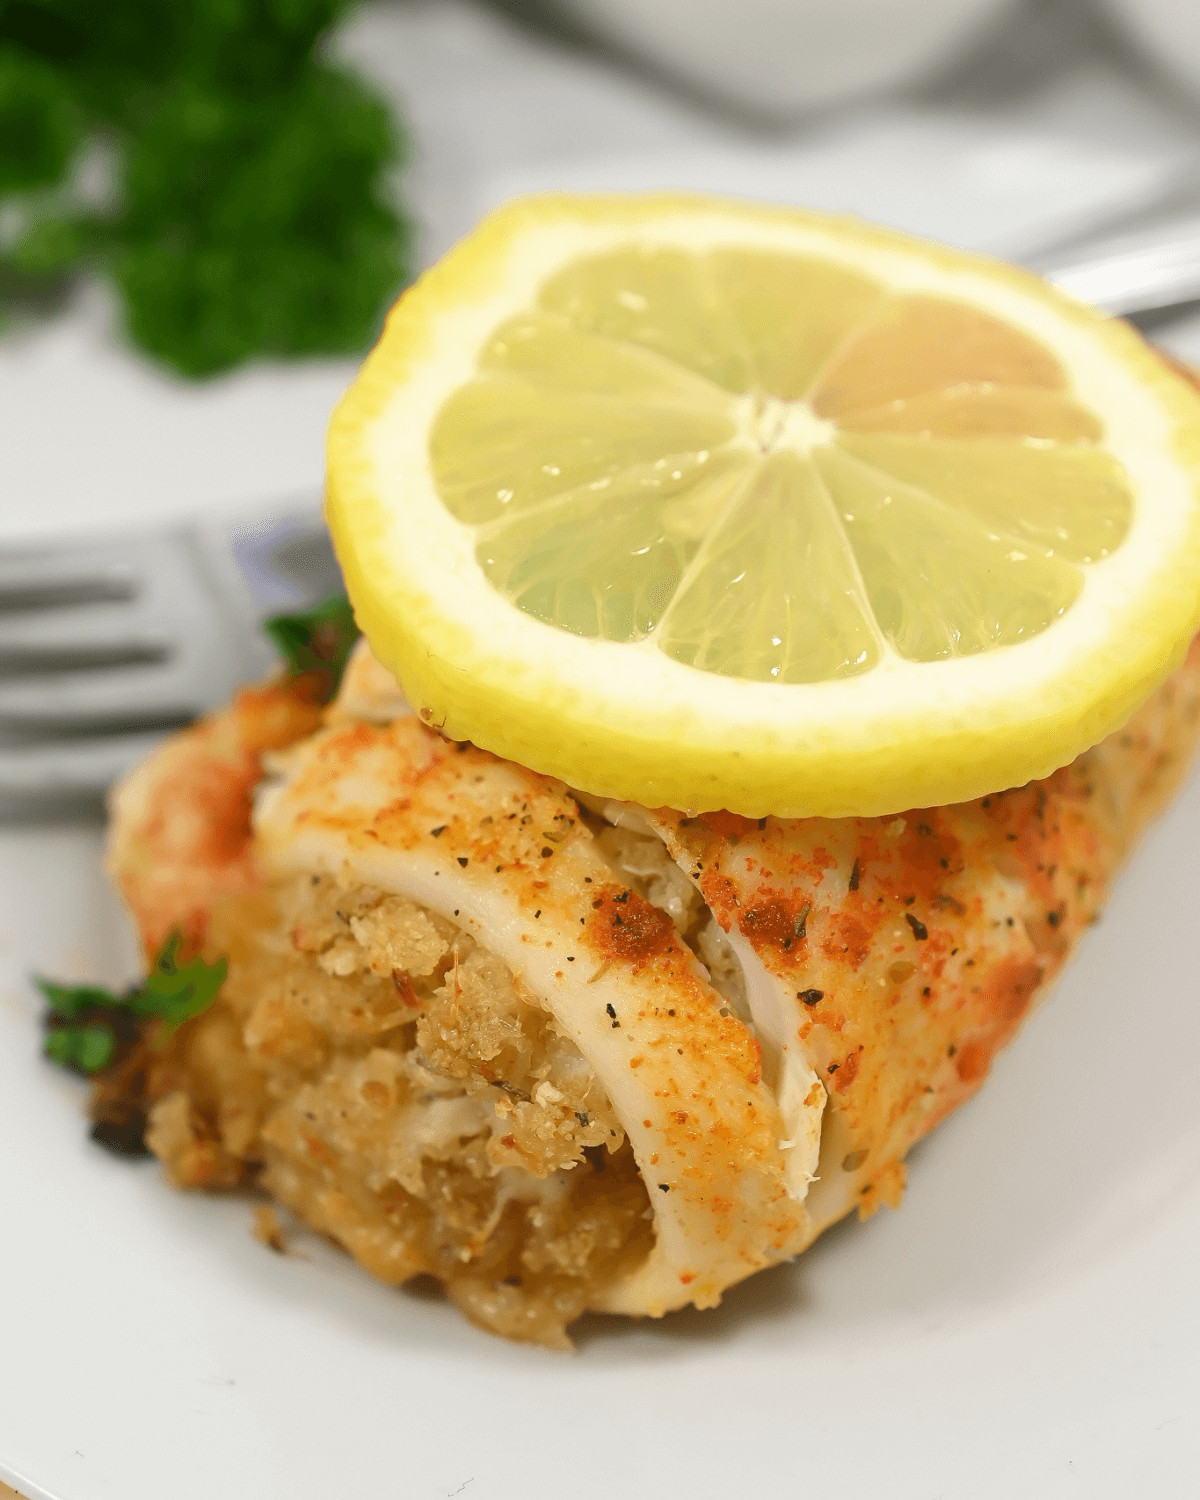 A close-up of a seasoned fish fillet with crabmeat stuffing, garnished with a lemon slice and parsley on a white plate.